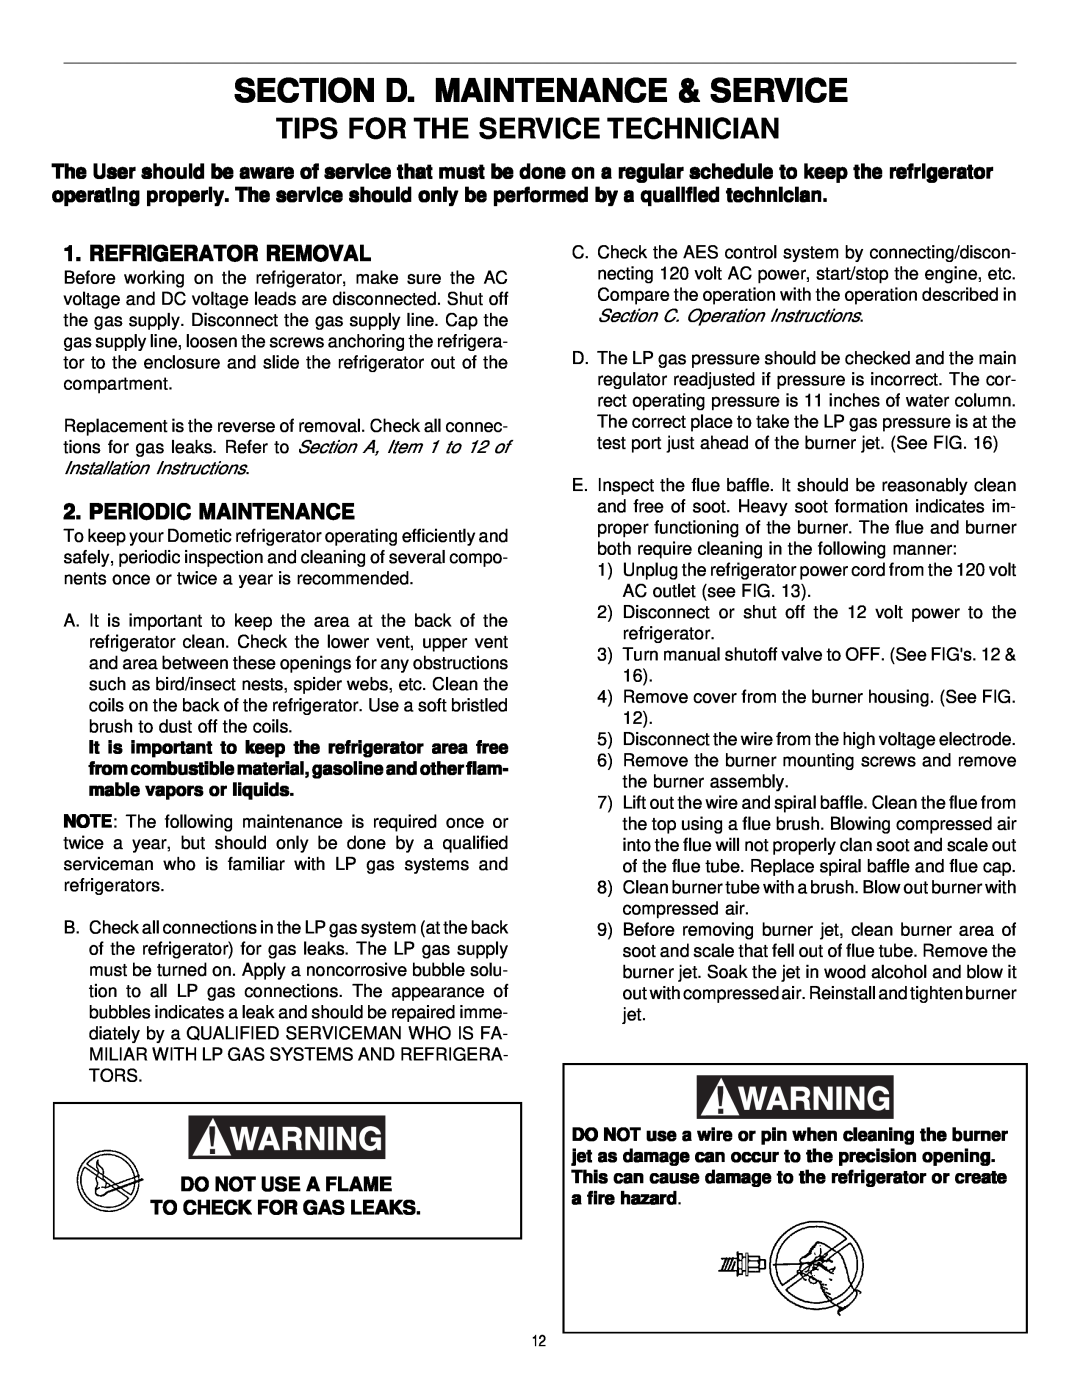 Dometic Elite RM7732 manual Section D. Maintenance & Service, Tips For The Service Technician 